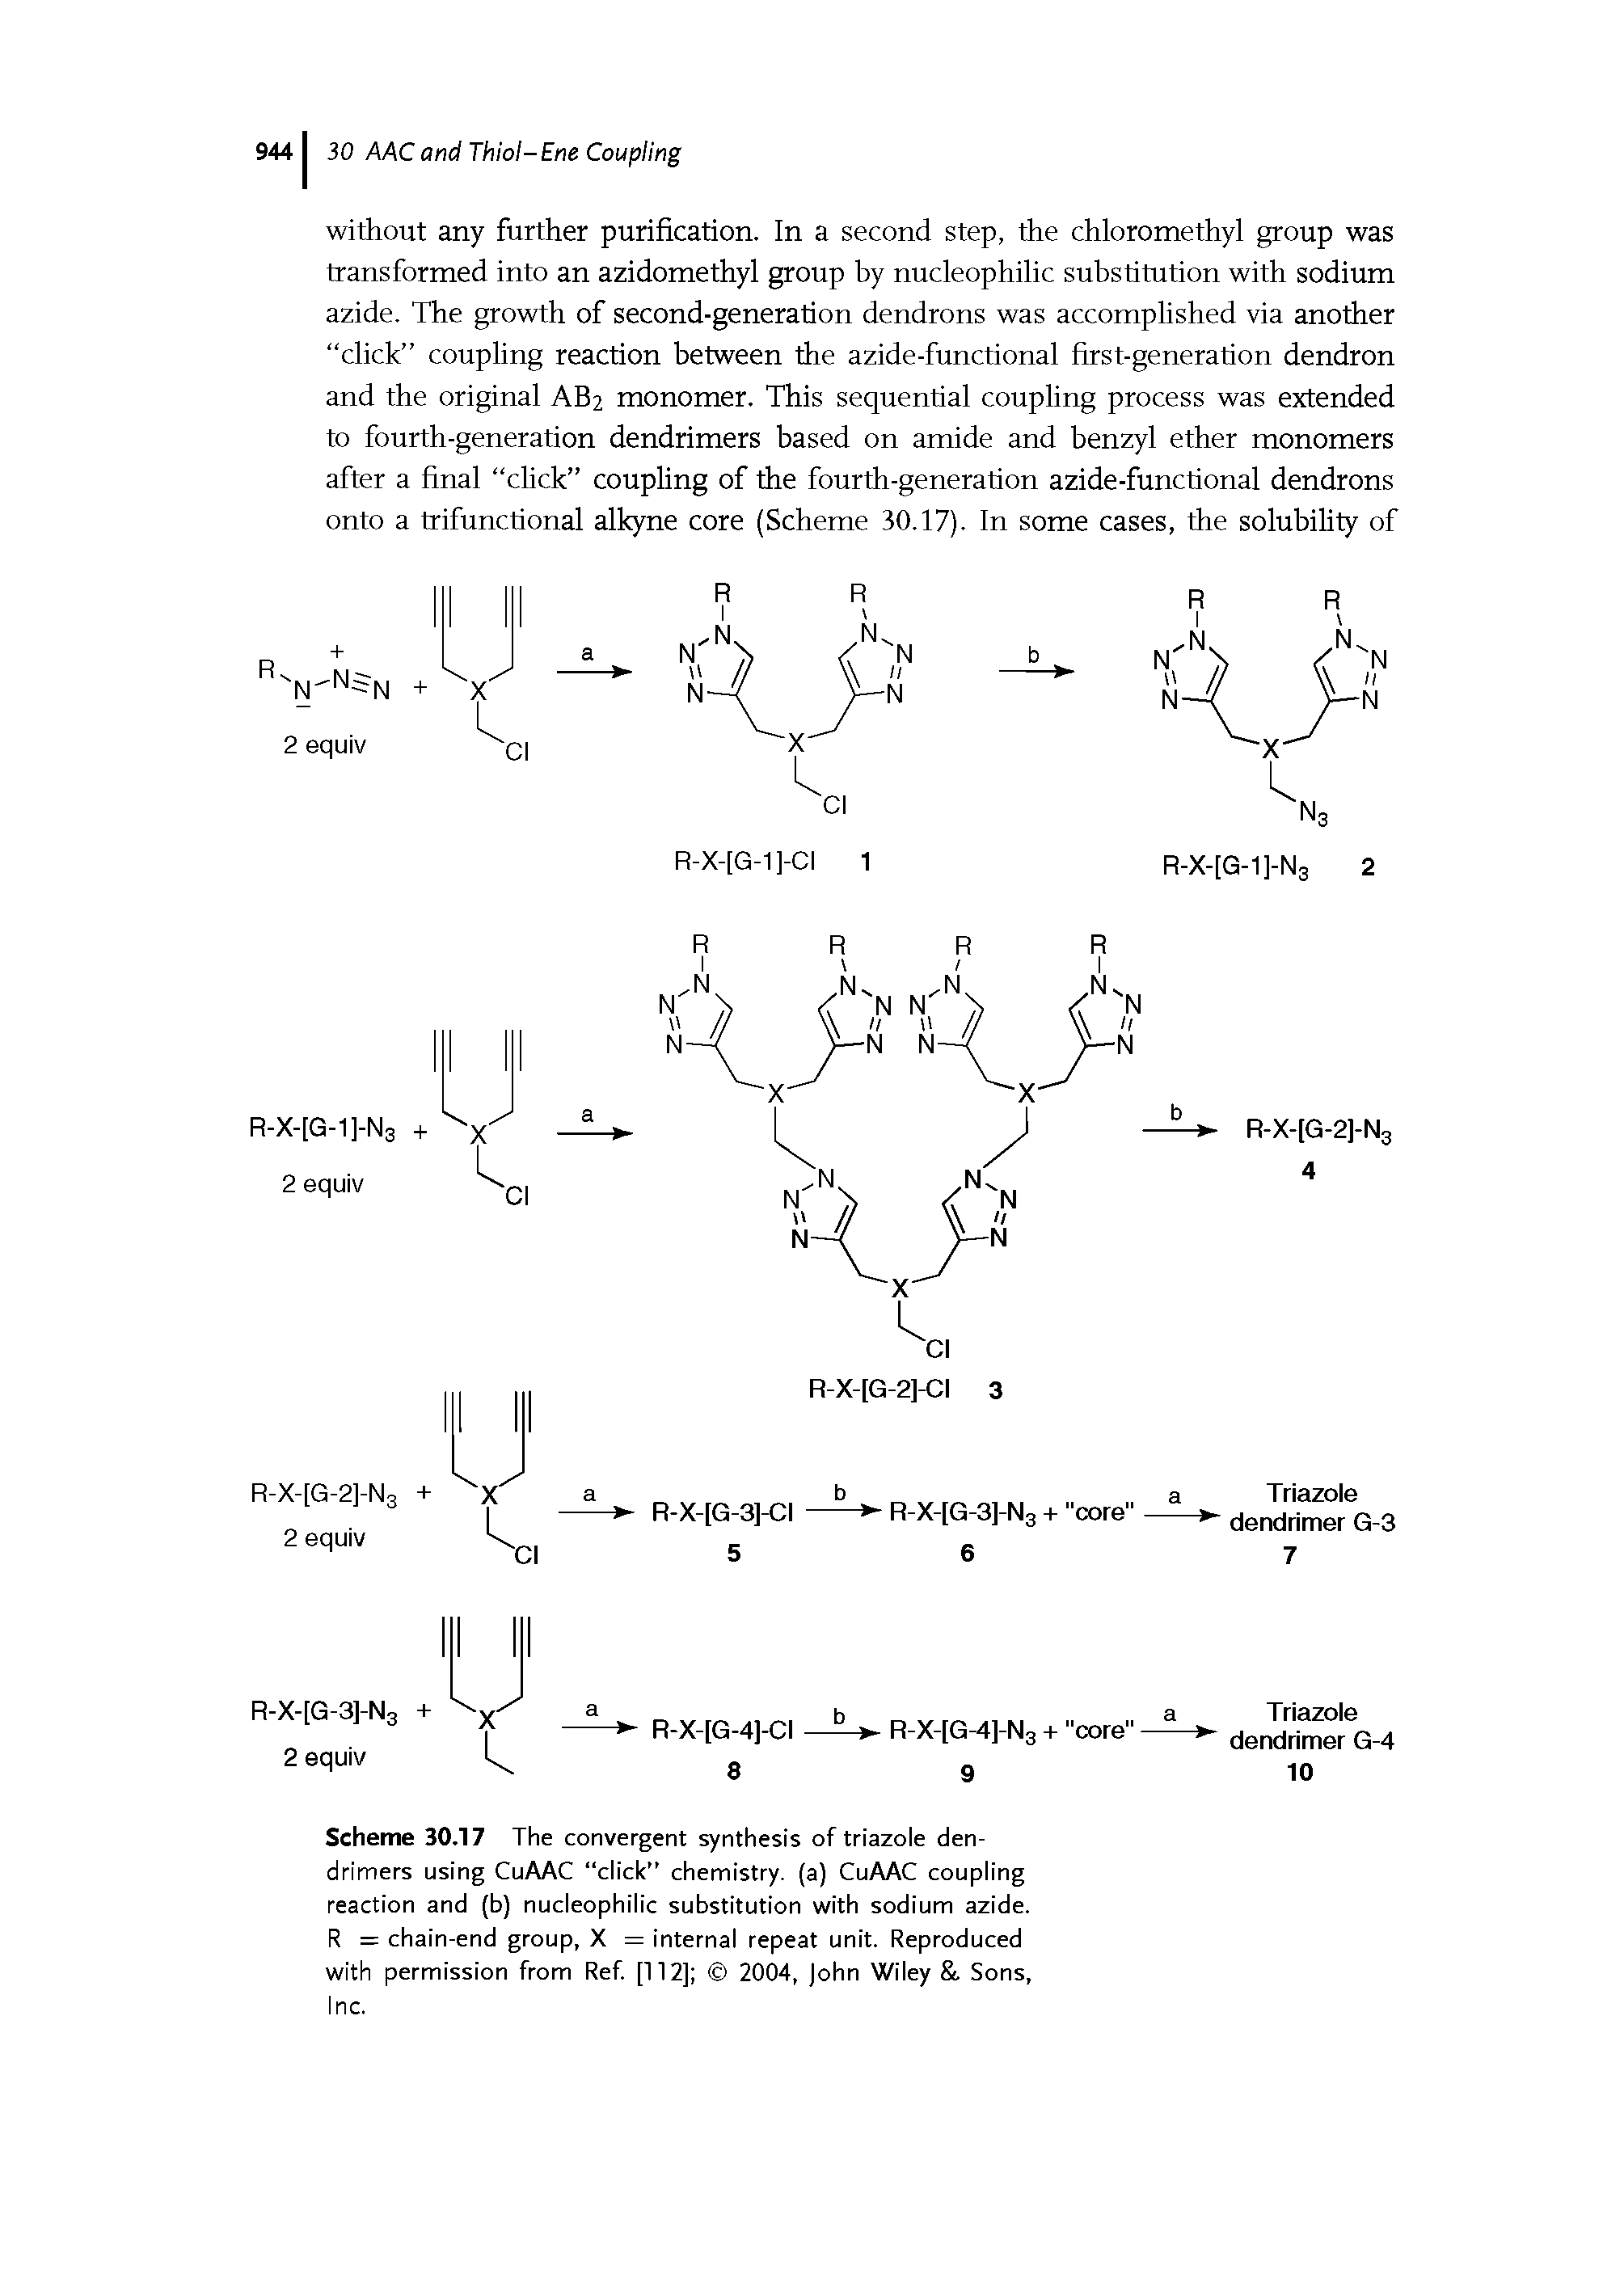 Scheme 30.17 The convergent synthesis of triazole dendrimers using CuAAC click chemistry, (a) CuAAC coupling reaction and (b) nucleophilic substitution with sodium azide. R = chain-end group, X = internal repeat unit. Reproduced with permission from Ref [112] 2004, john Wiley. Sons, Inc.